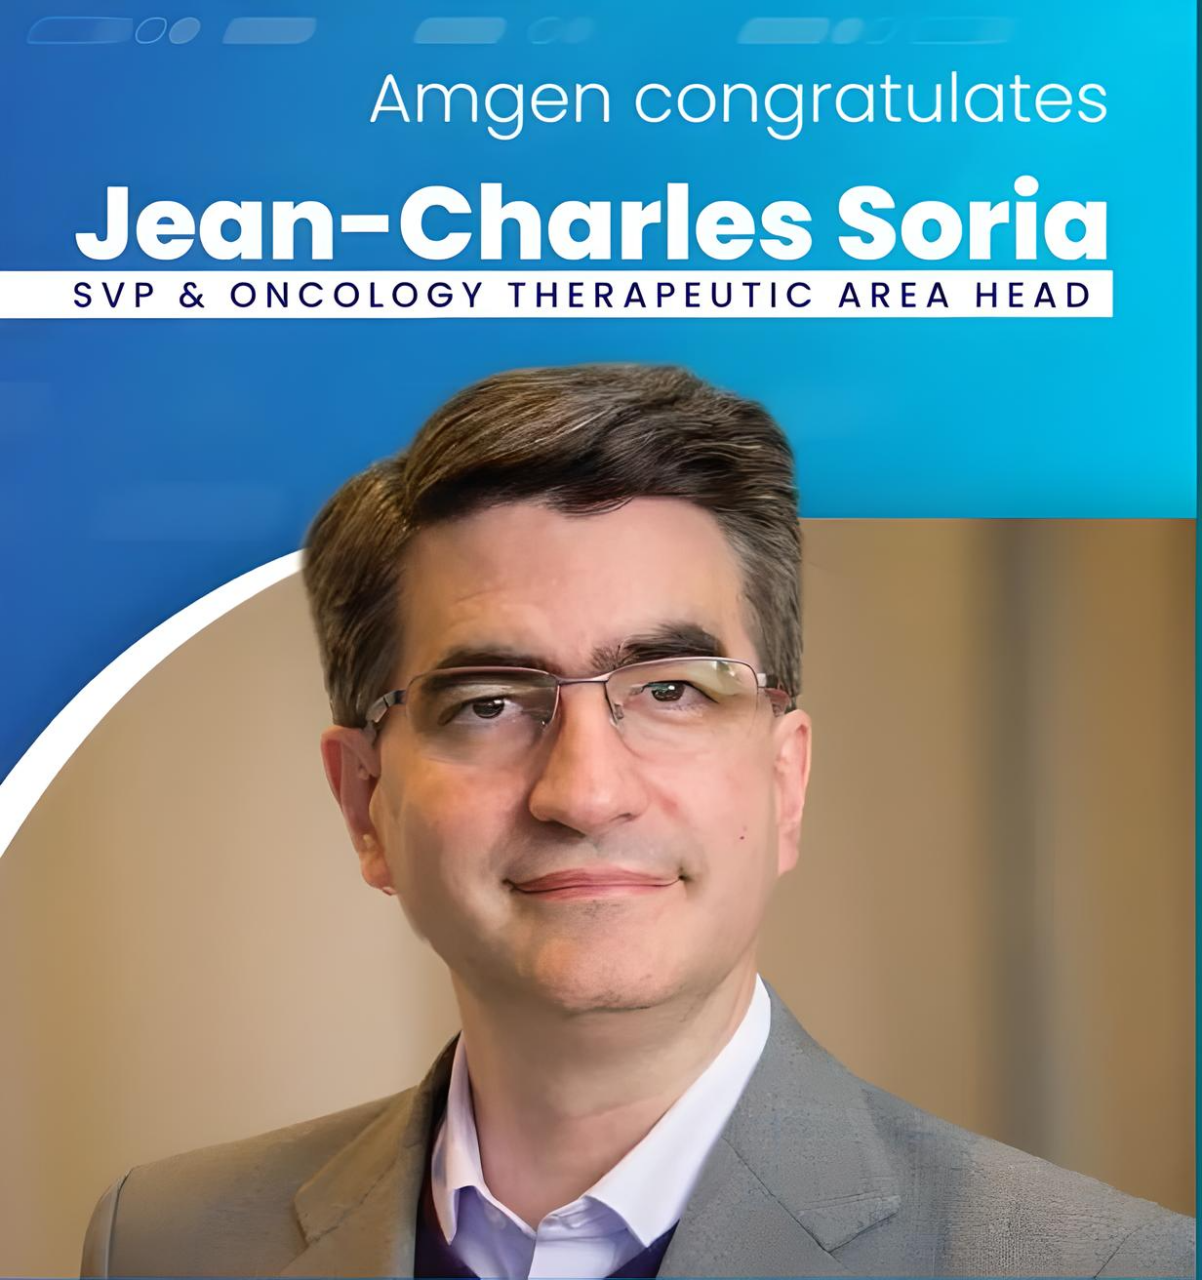 Jean-Charles Soria: Thank you to my American Association for Cancer Research colleagues for this humbling vote of confidence